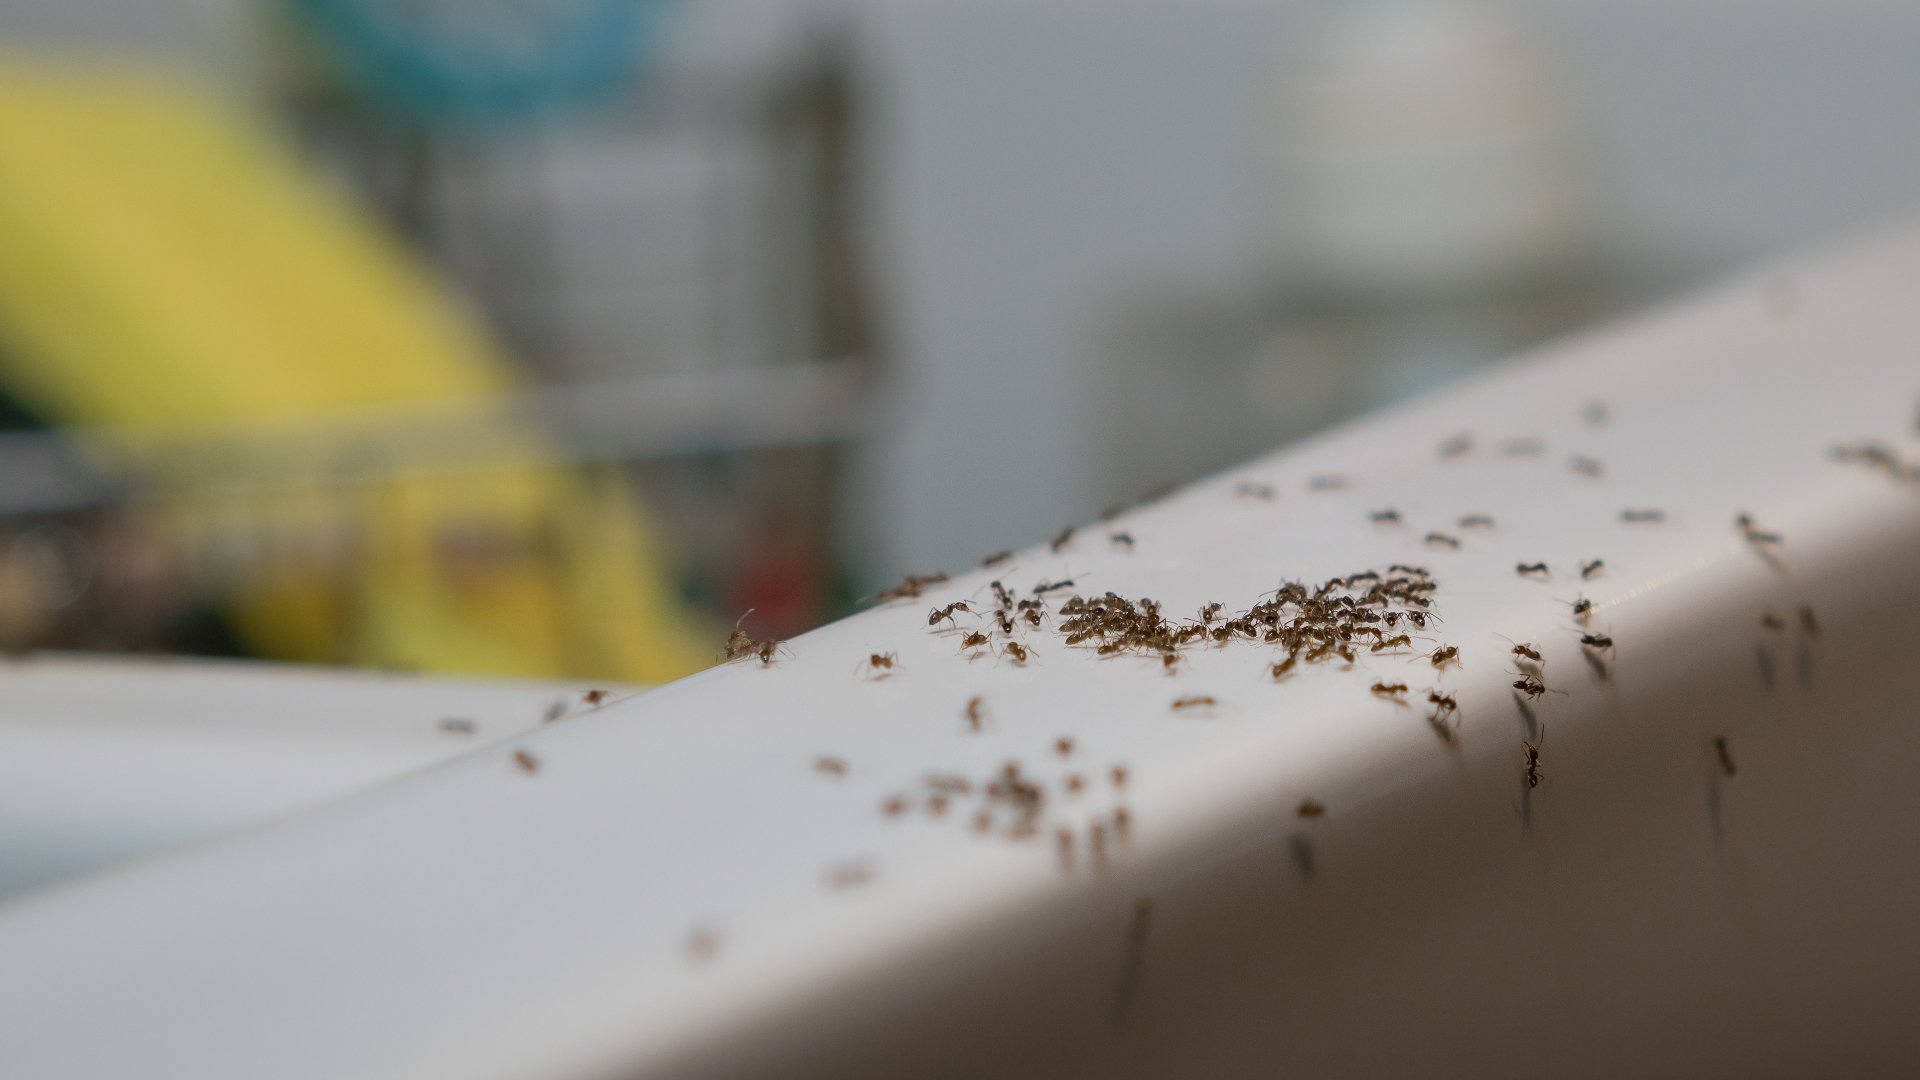 You Don't Need to Apply Chemicals in Your House to Keep Pests From Coming Inside!